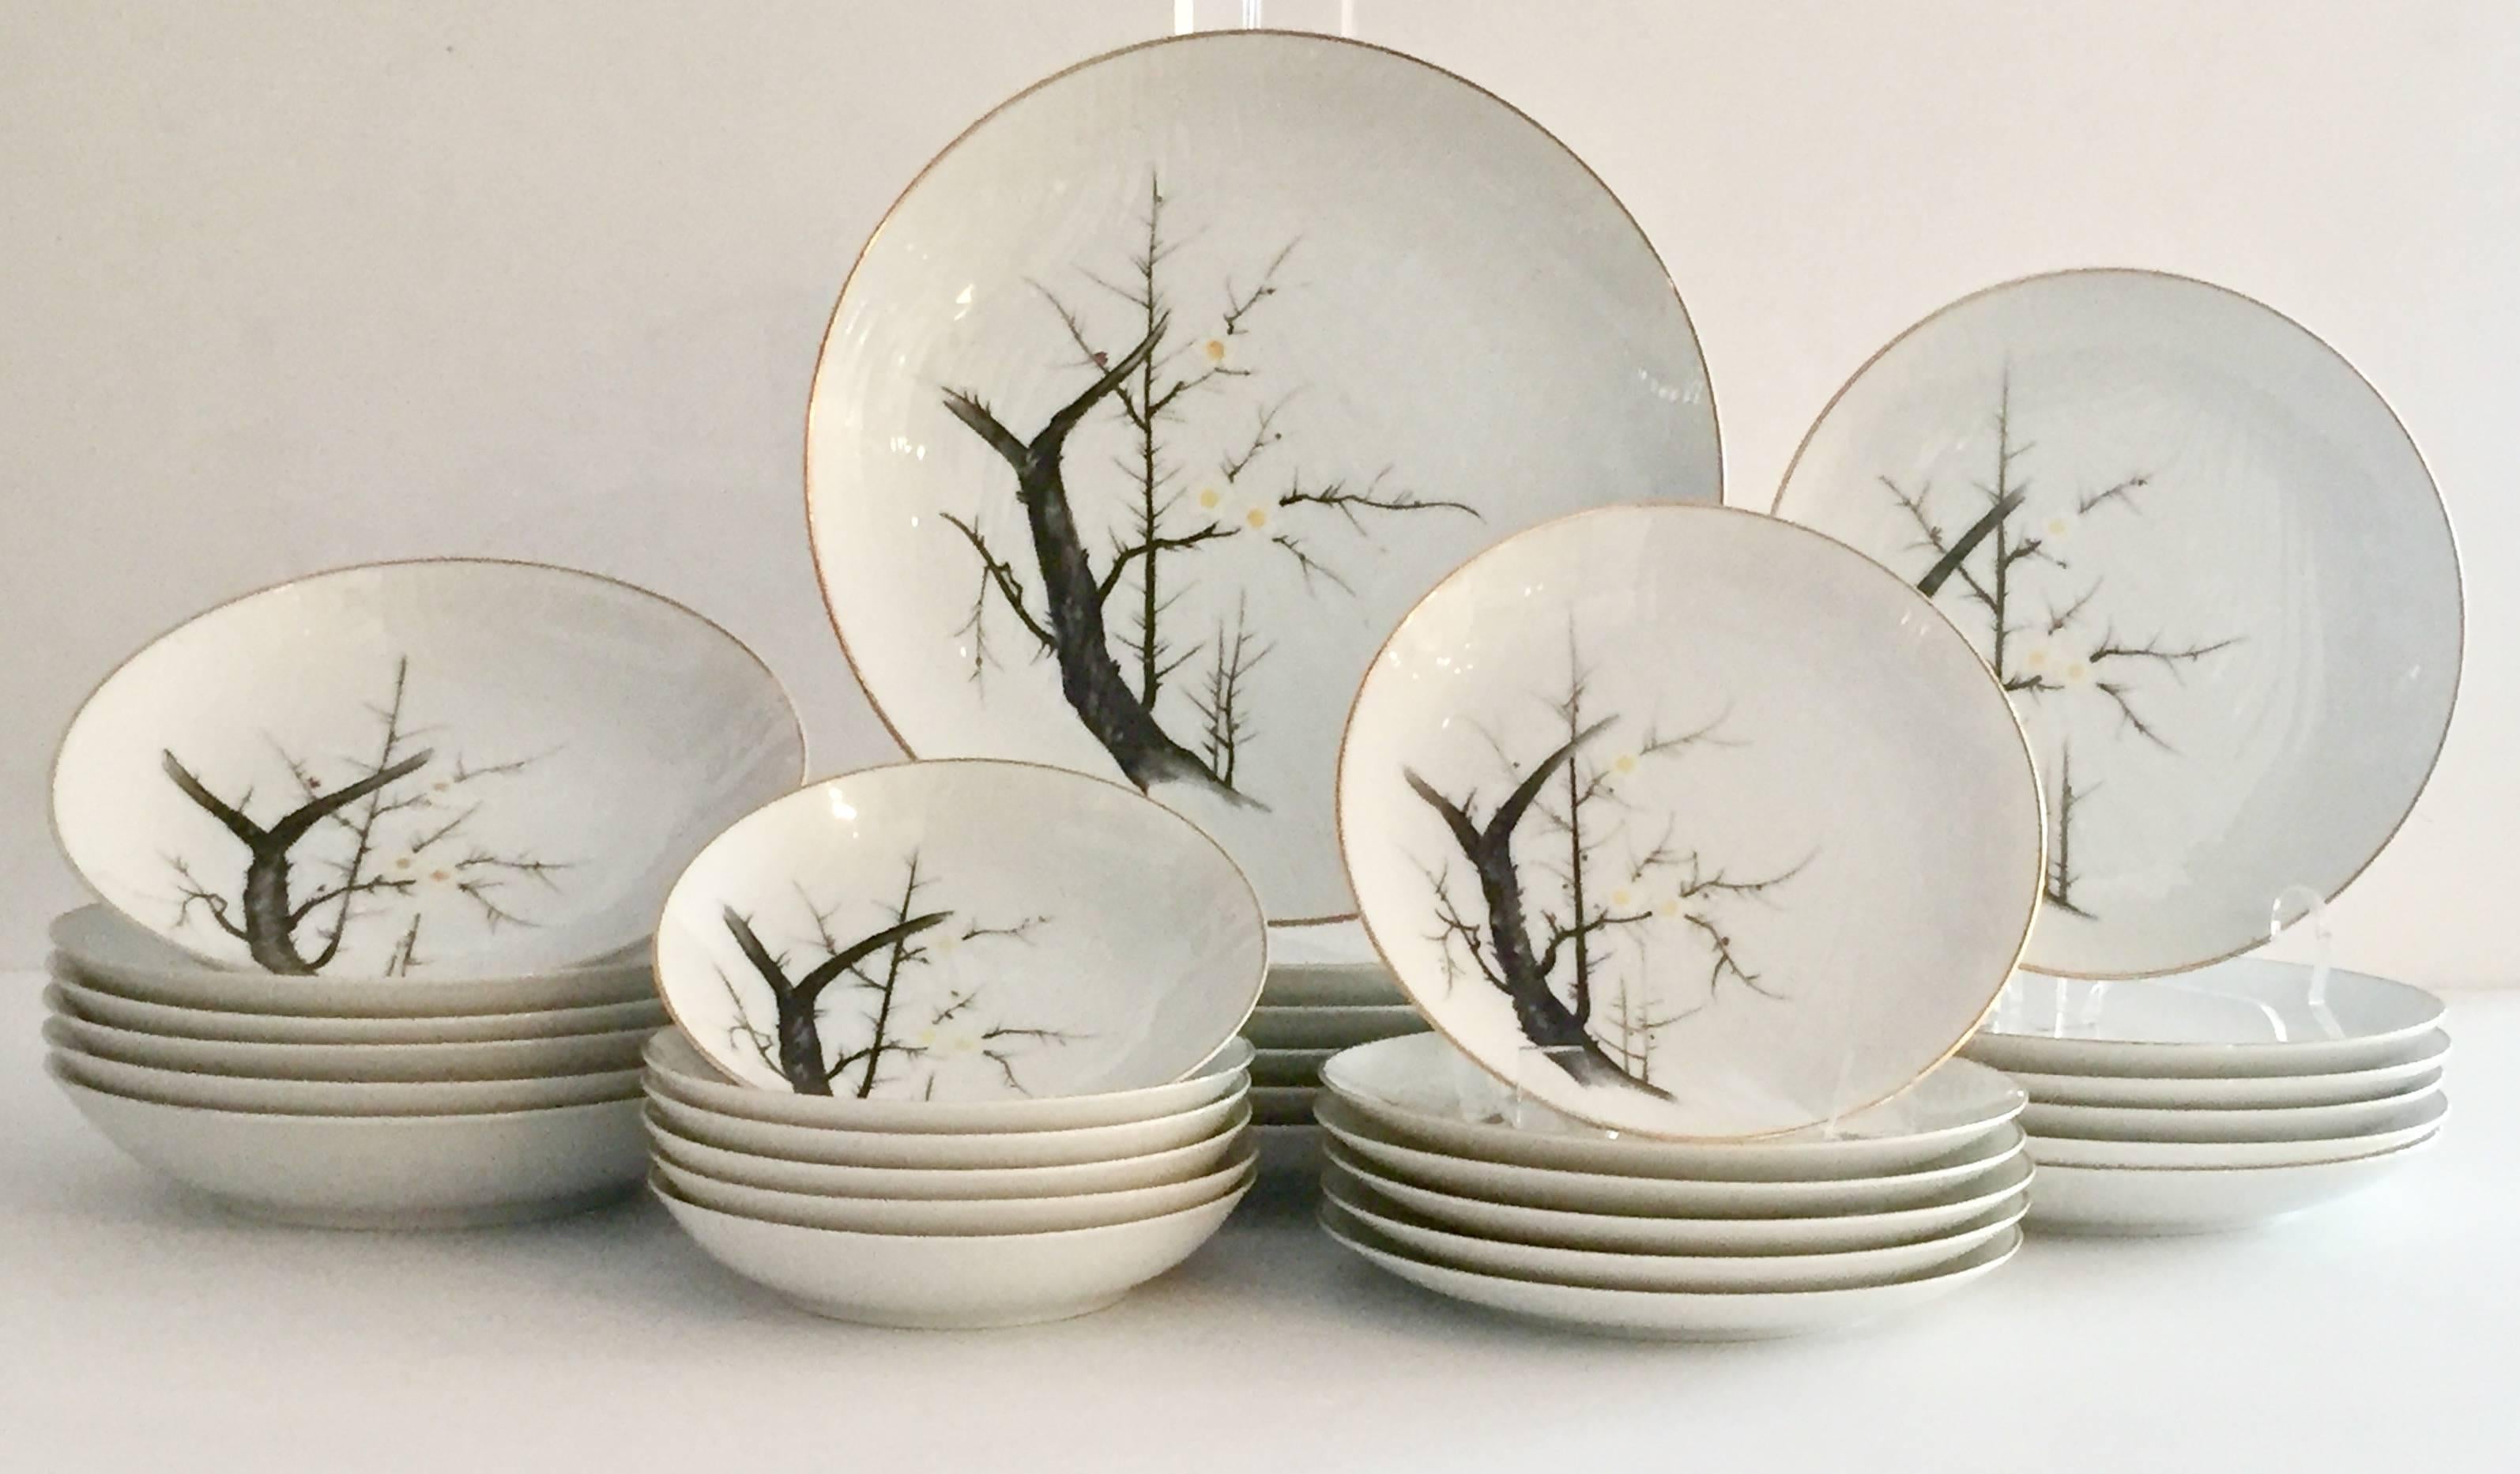 Set of 35 pieces Japanese porcelain "White Plum" with 22-karat gold detail. White faux bois textured ground with trees, birds and flowers rendered in black, white, yellow, teal and red. Set includes seven, five-piece place settings, seven